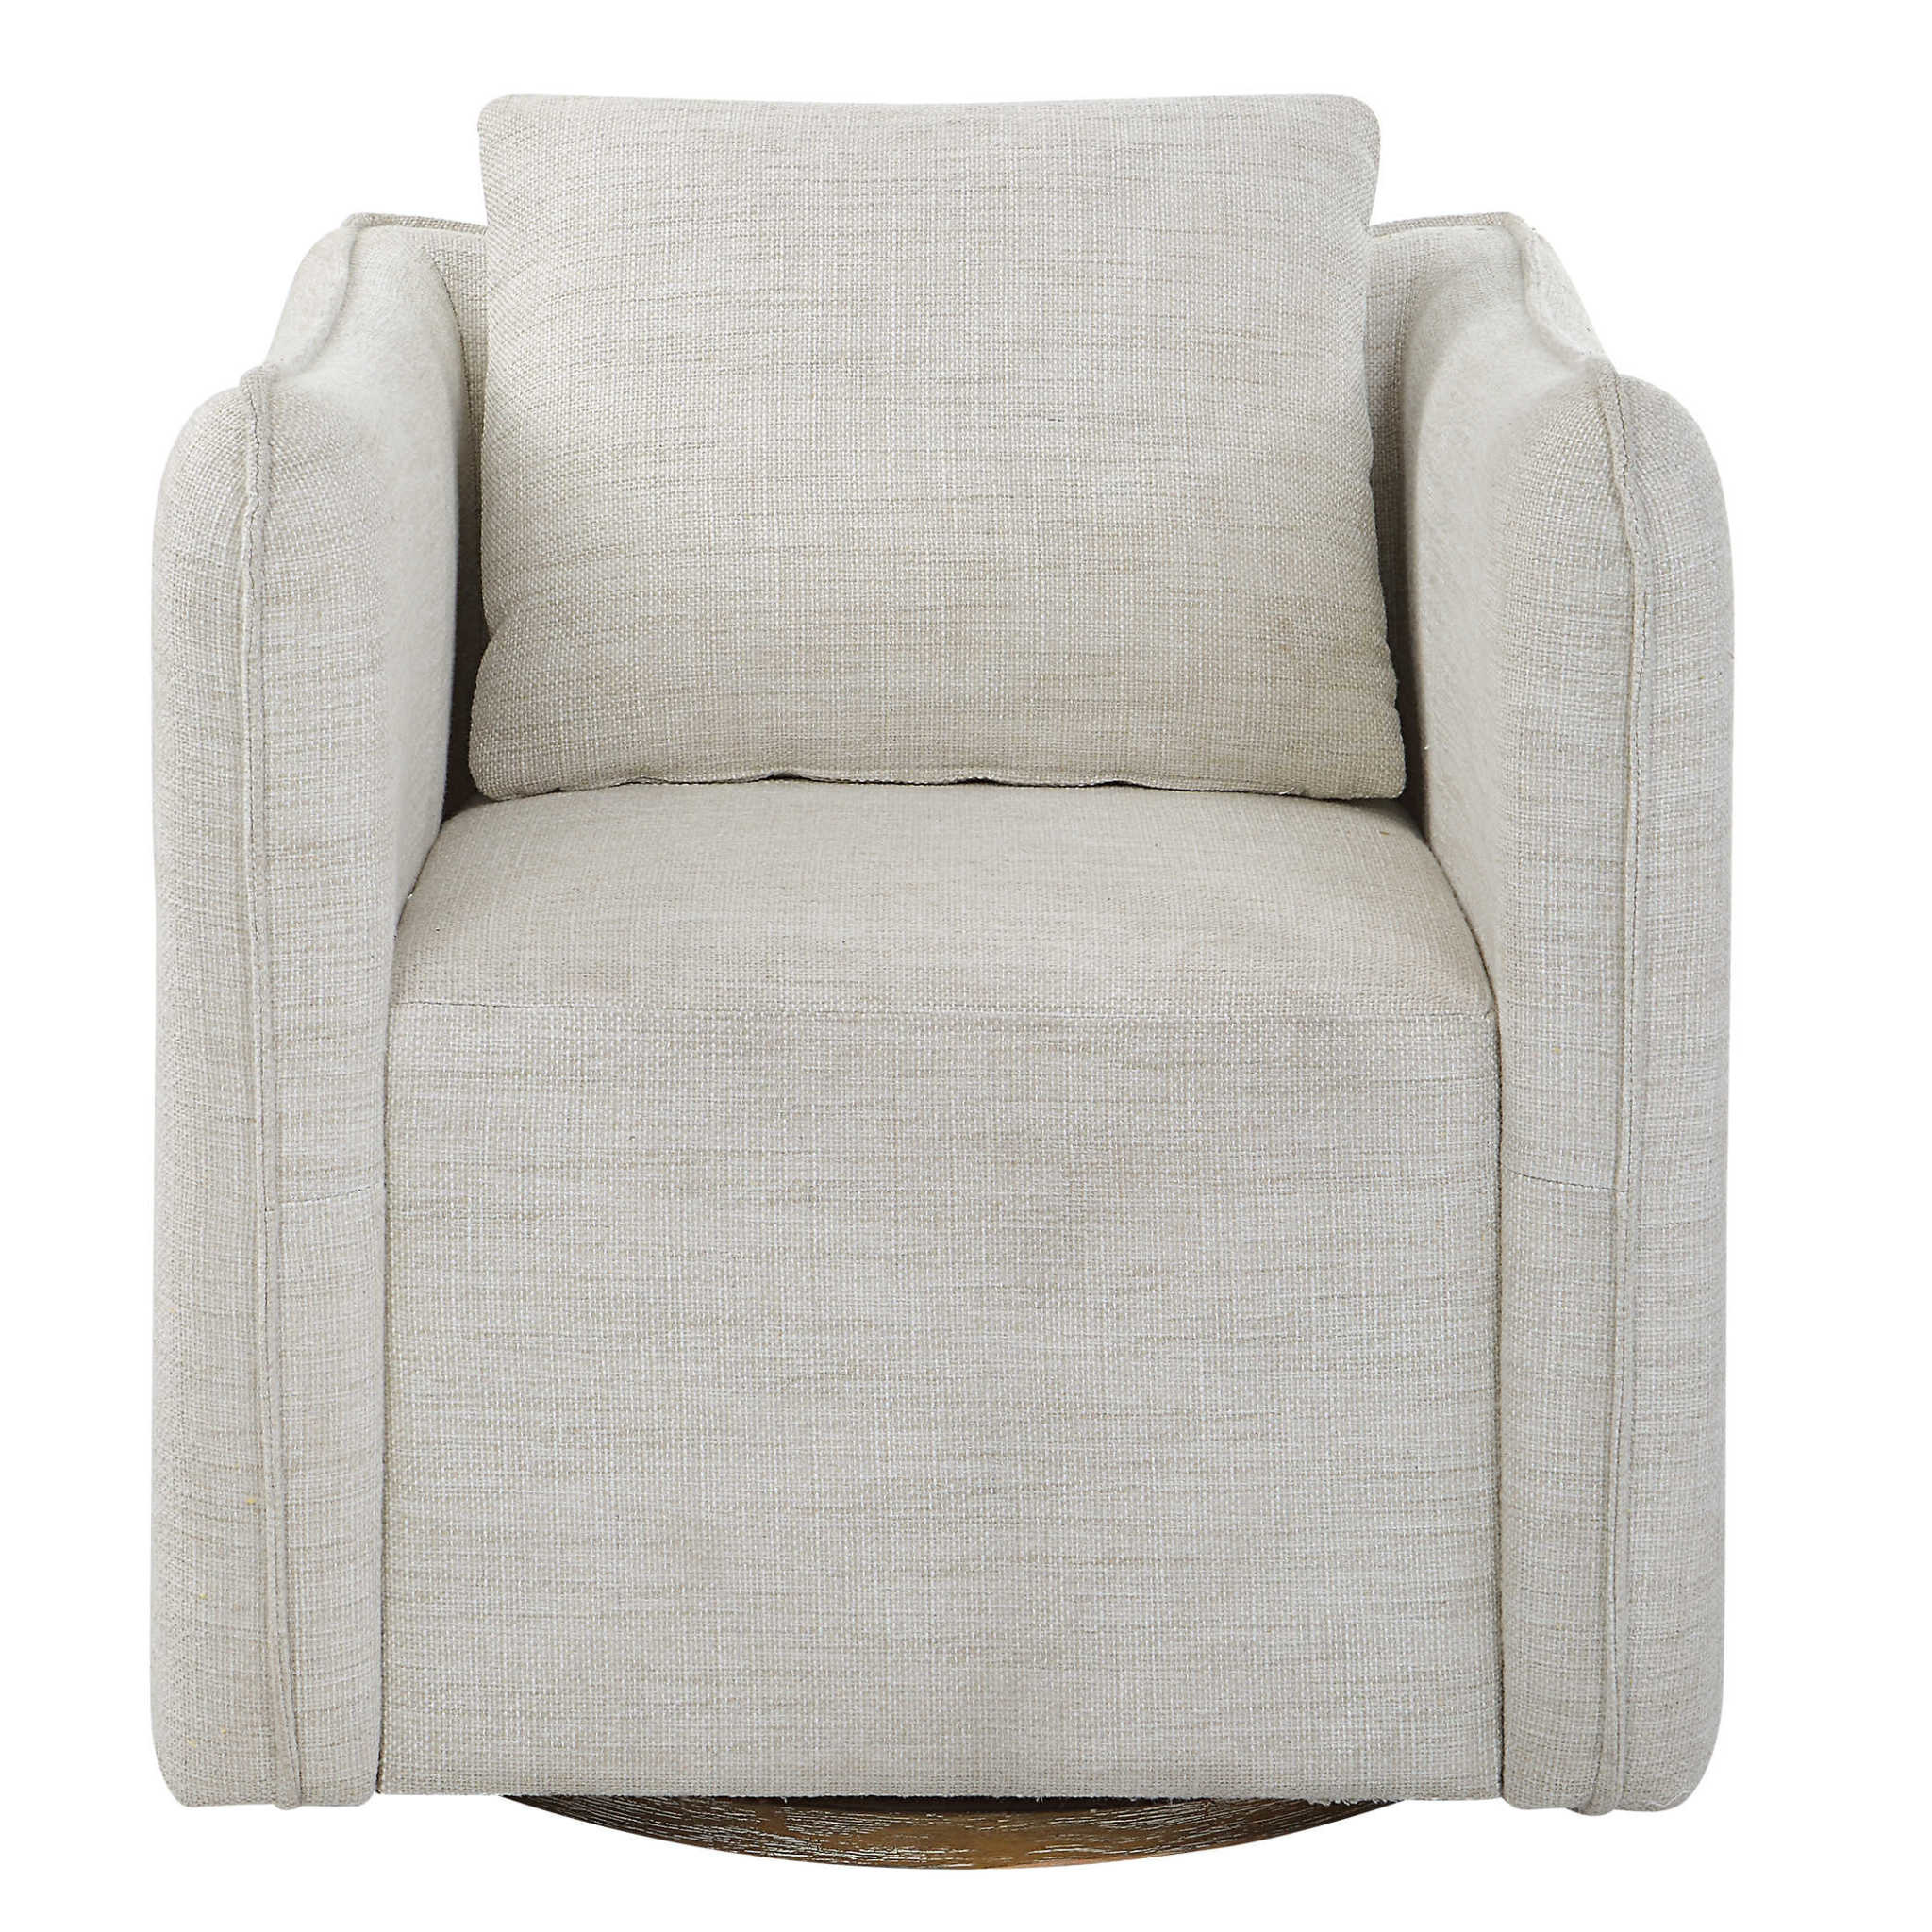 Corben Swivel Chair, White, 29 x 30 x 29 Furniture Available for Local Delivery or Pick Up